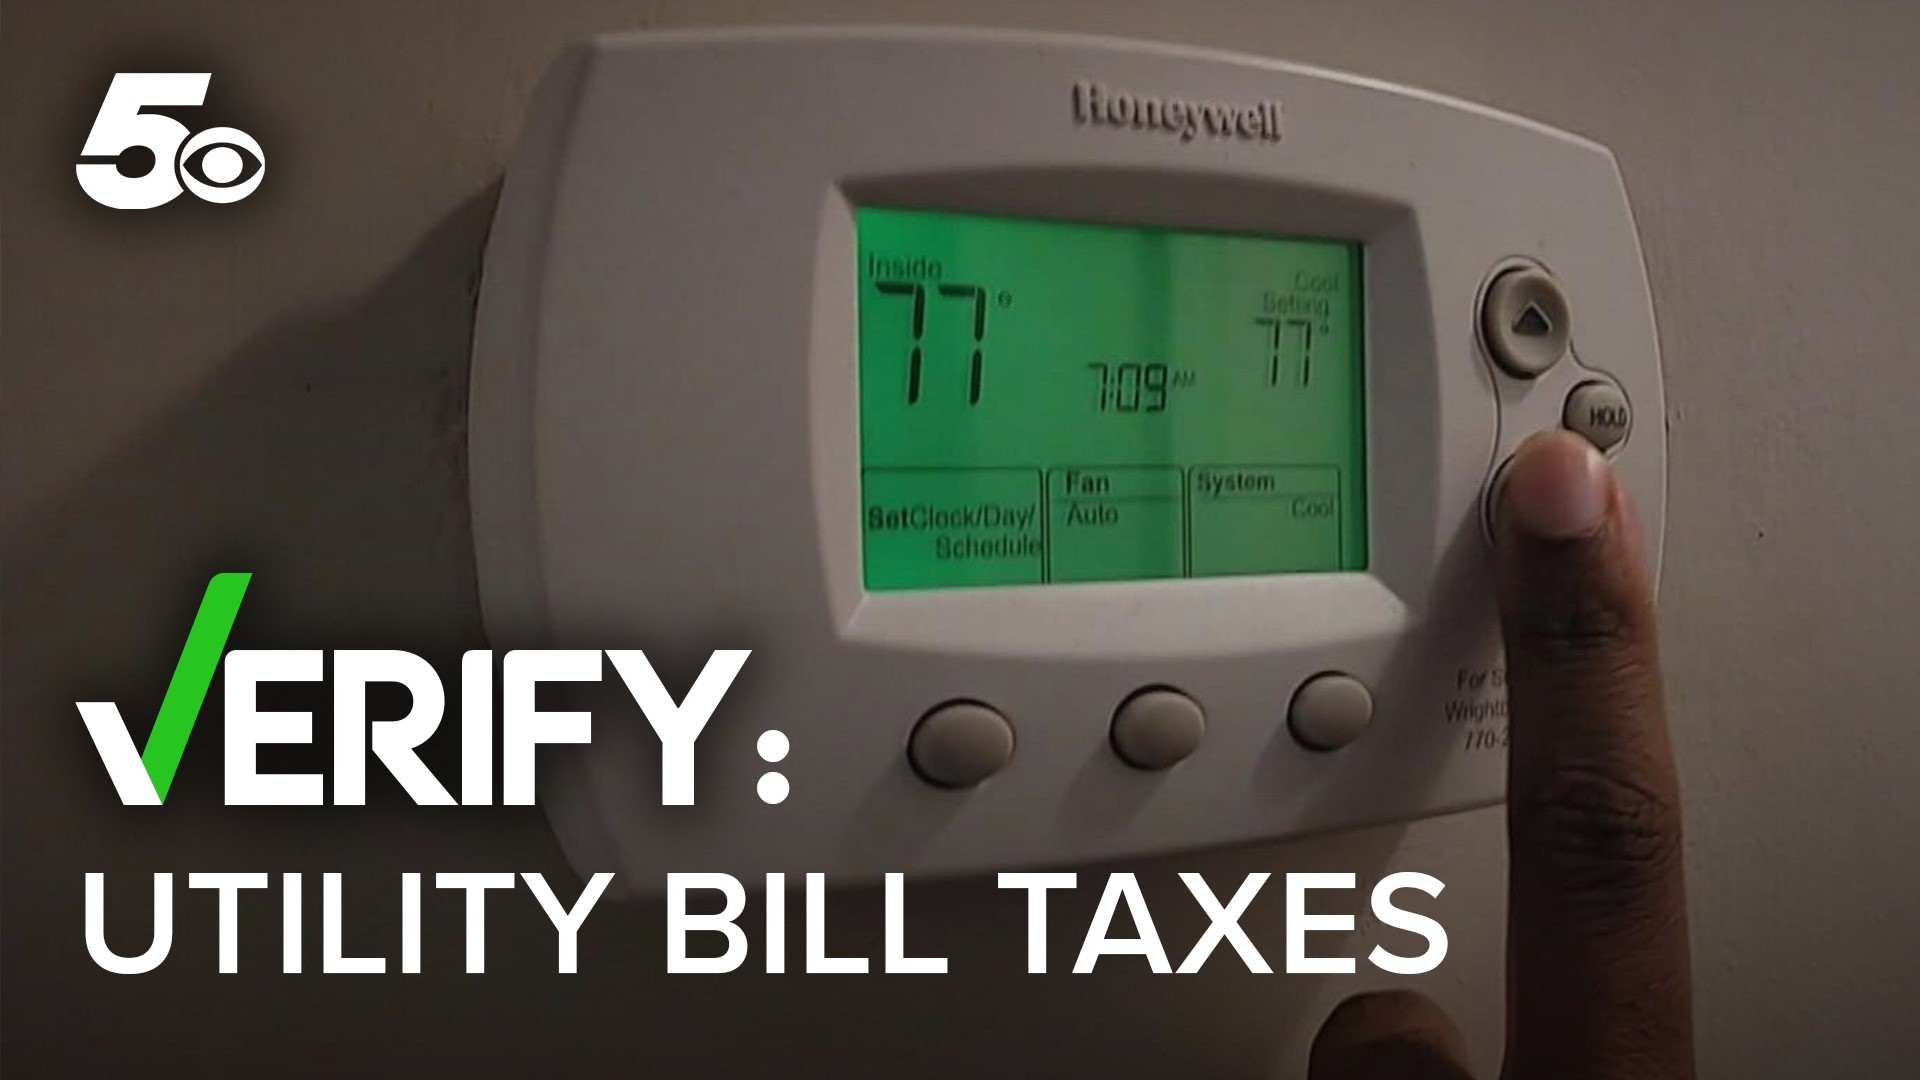 A viewer asked if the city tax on their utility bill was correct and the 5NEWS Team verified that it is a legitimate franchise fee from the state.